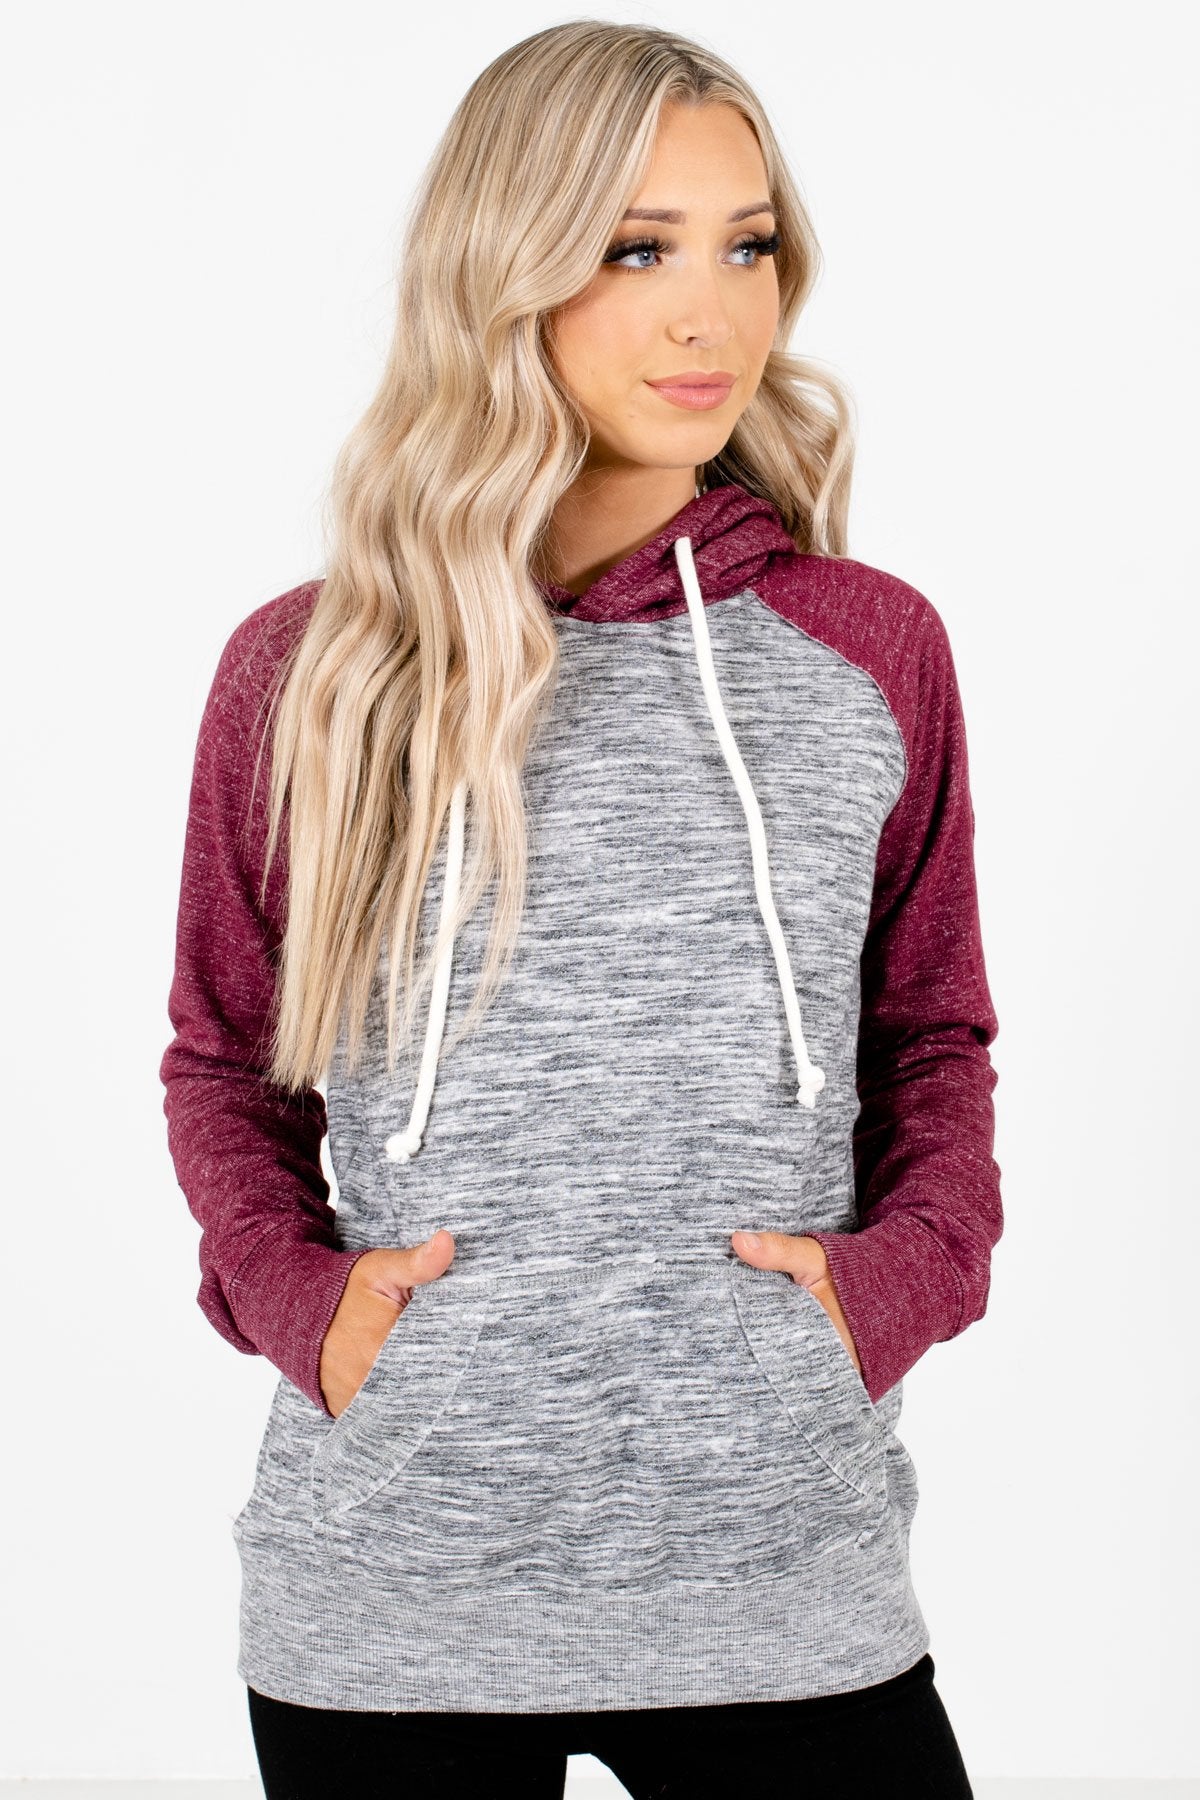 Burgundy Cute and Comfortable Boutique Hoodies for Women